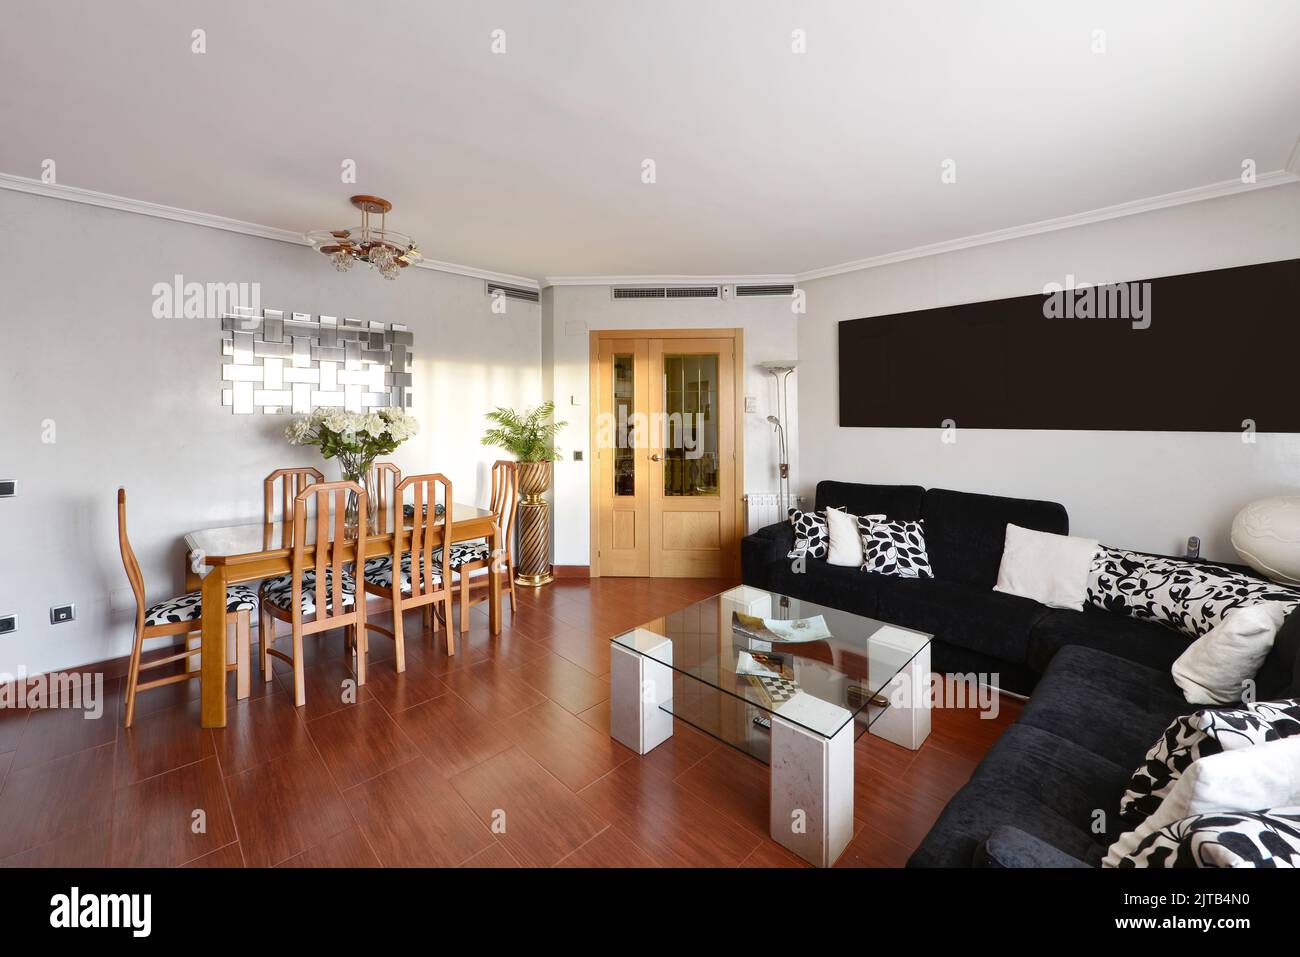 Living room of a residential home with a wooden dining table with matching chairs, a corner sofa covering two walls upholstered in black fabric and re Stock Photo